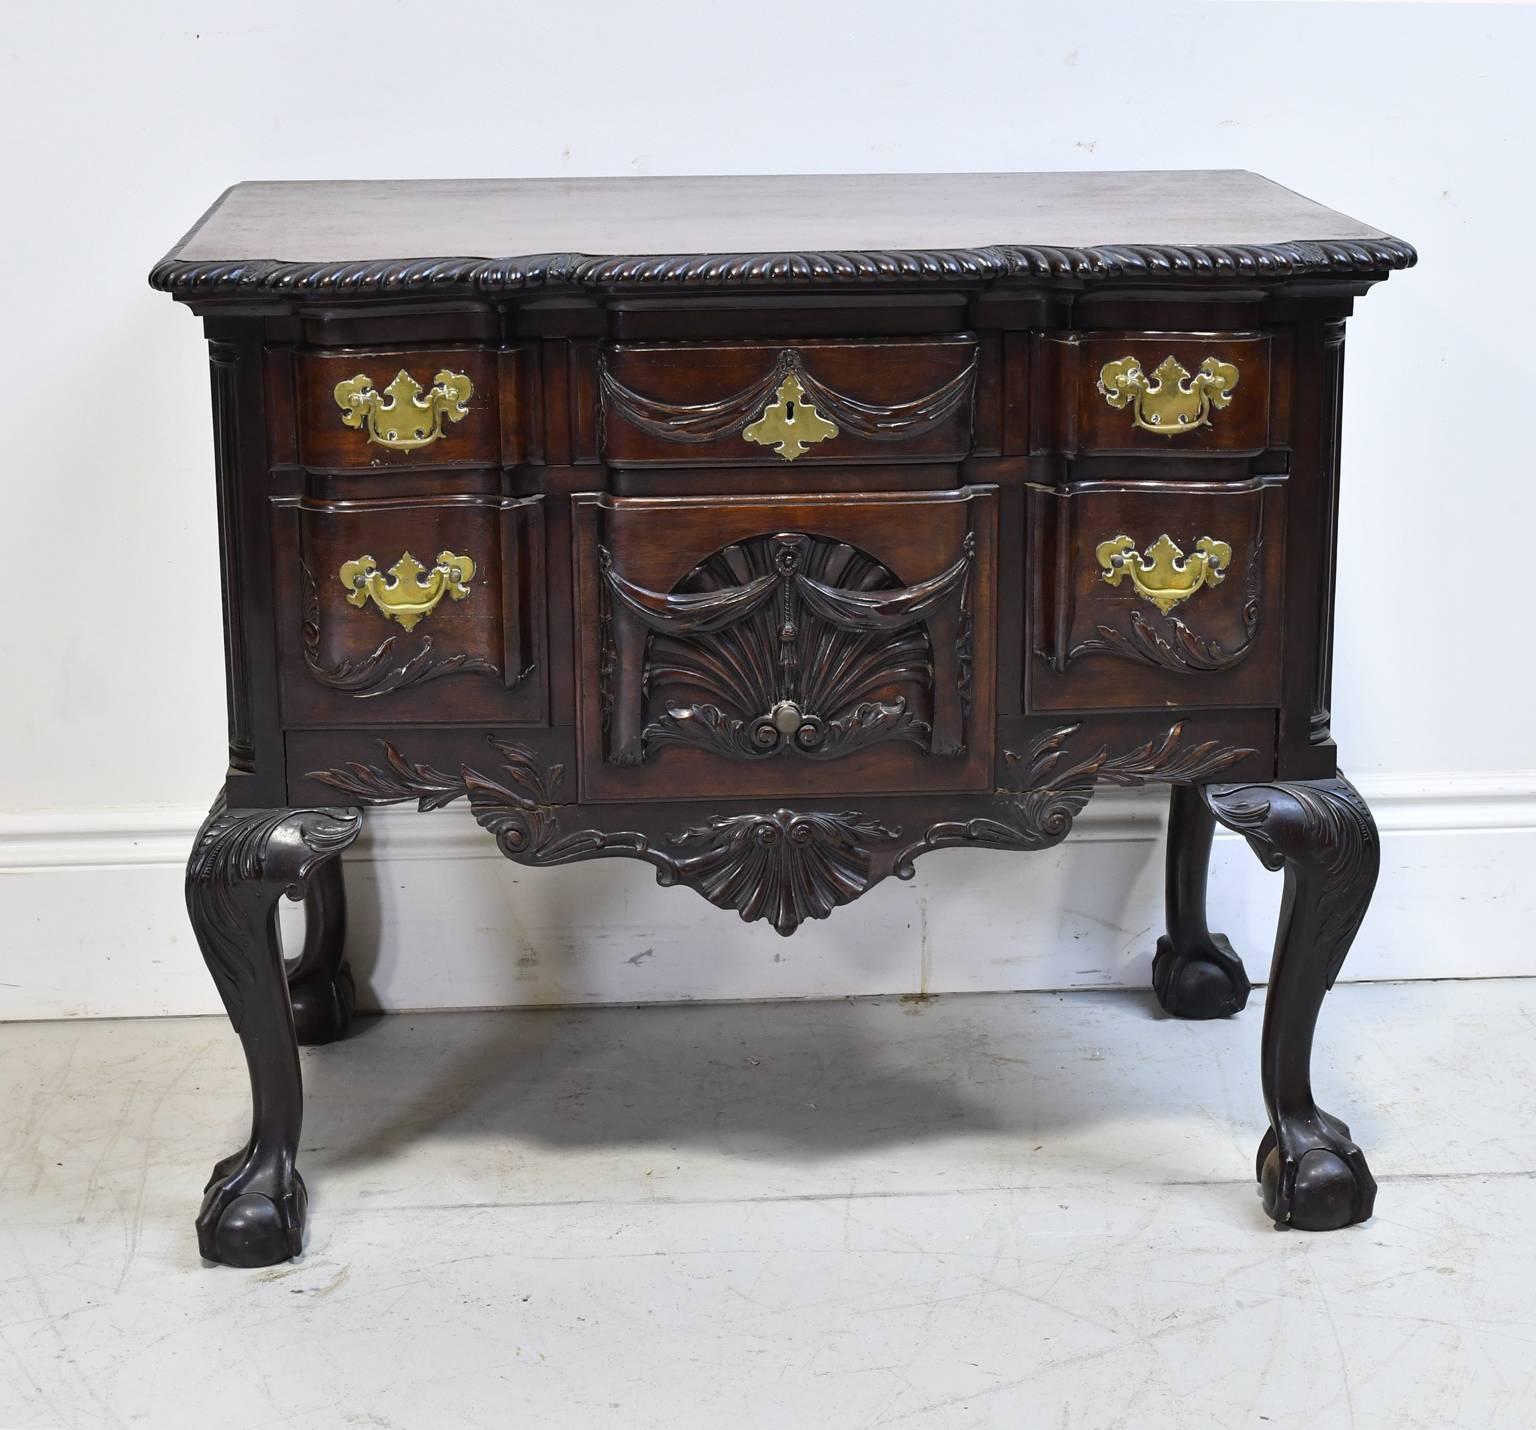 A lovely centennial lowboy chest in mahogany in the Chippendale style with six drawers along blockfront, brass pulls & plates, and cabriole legs ending in ball-and-claw feet. Features beautifully-articulated carvings throughout which include